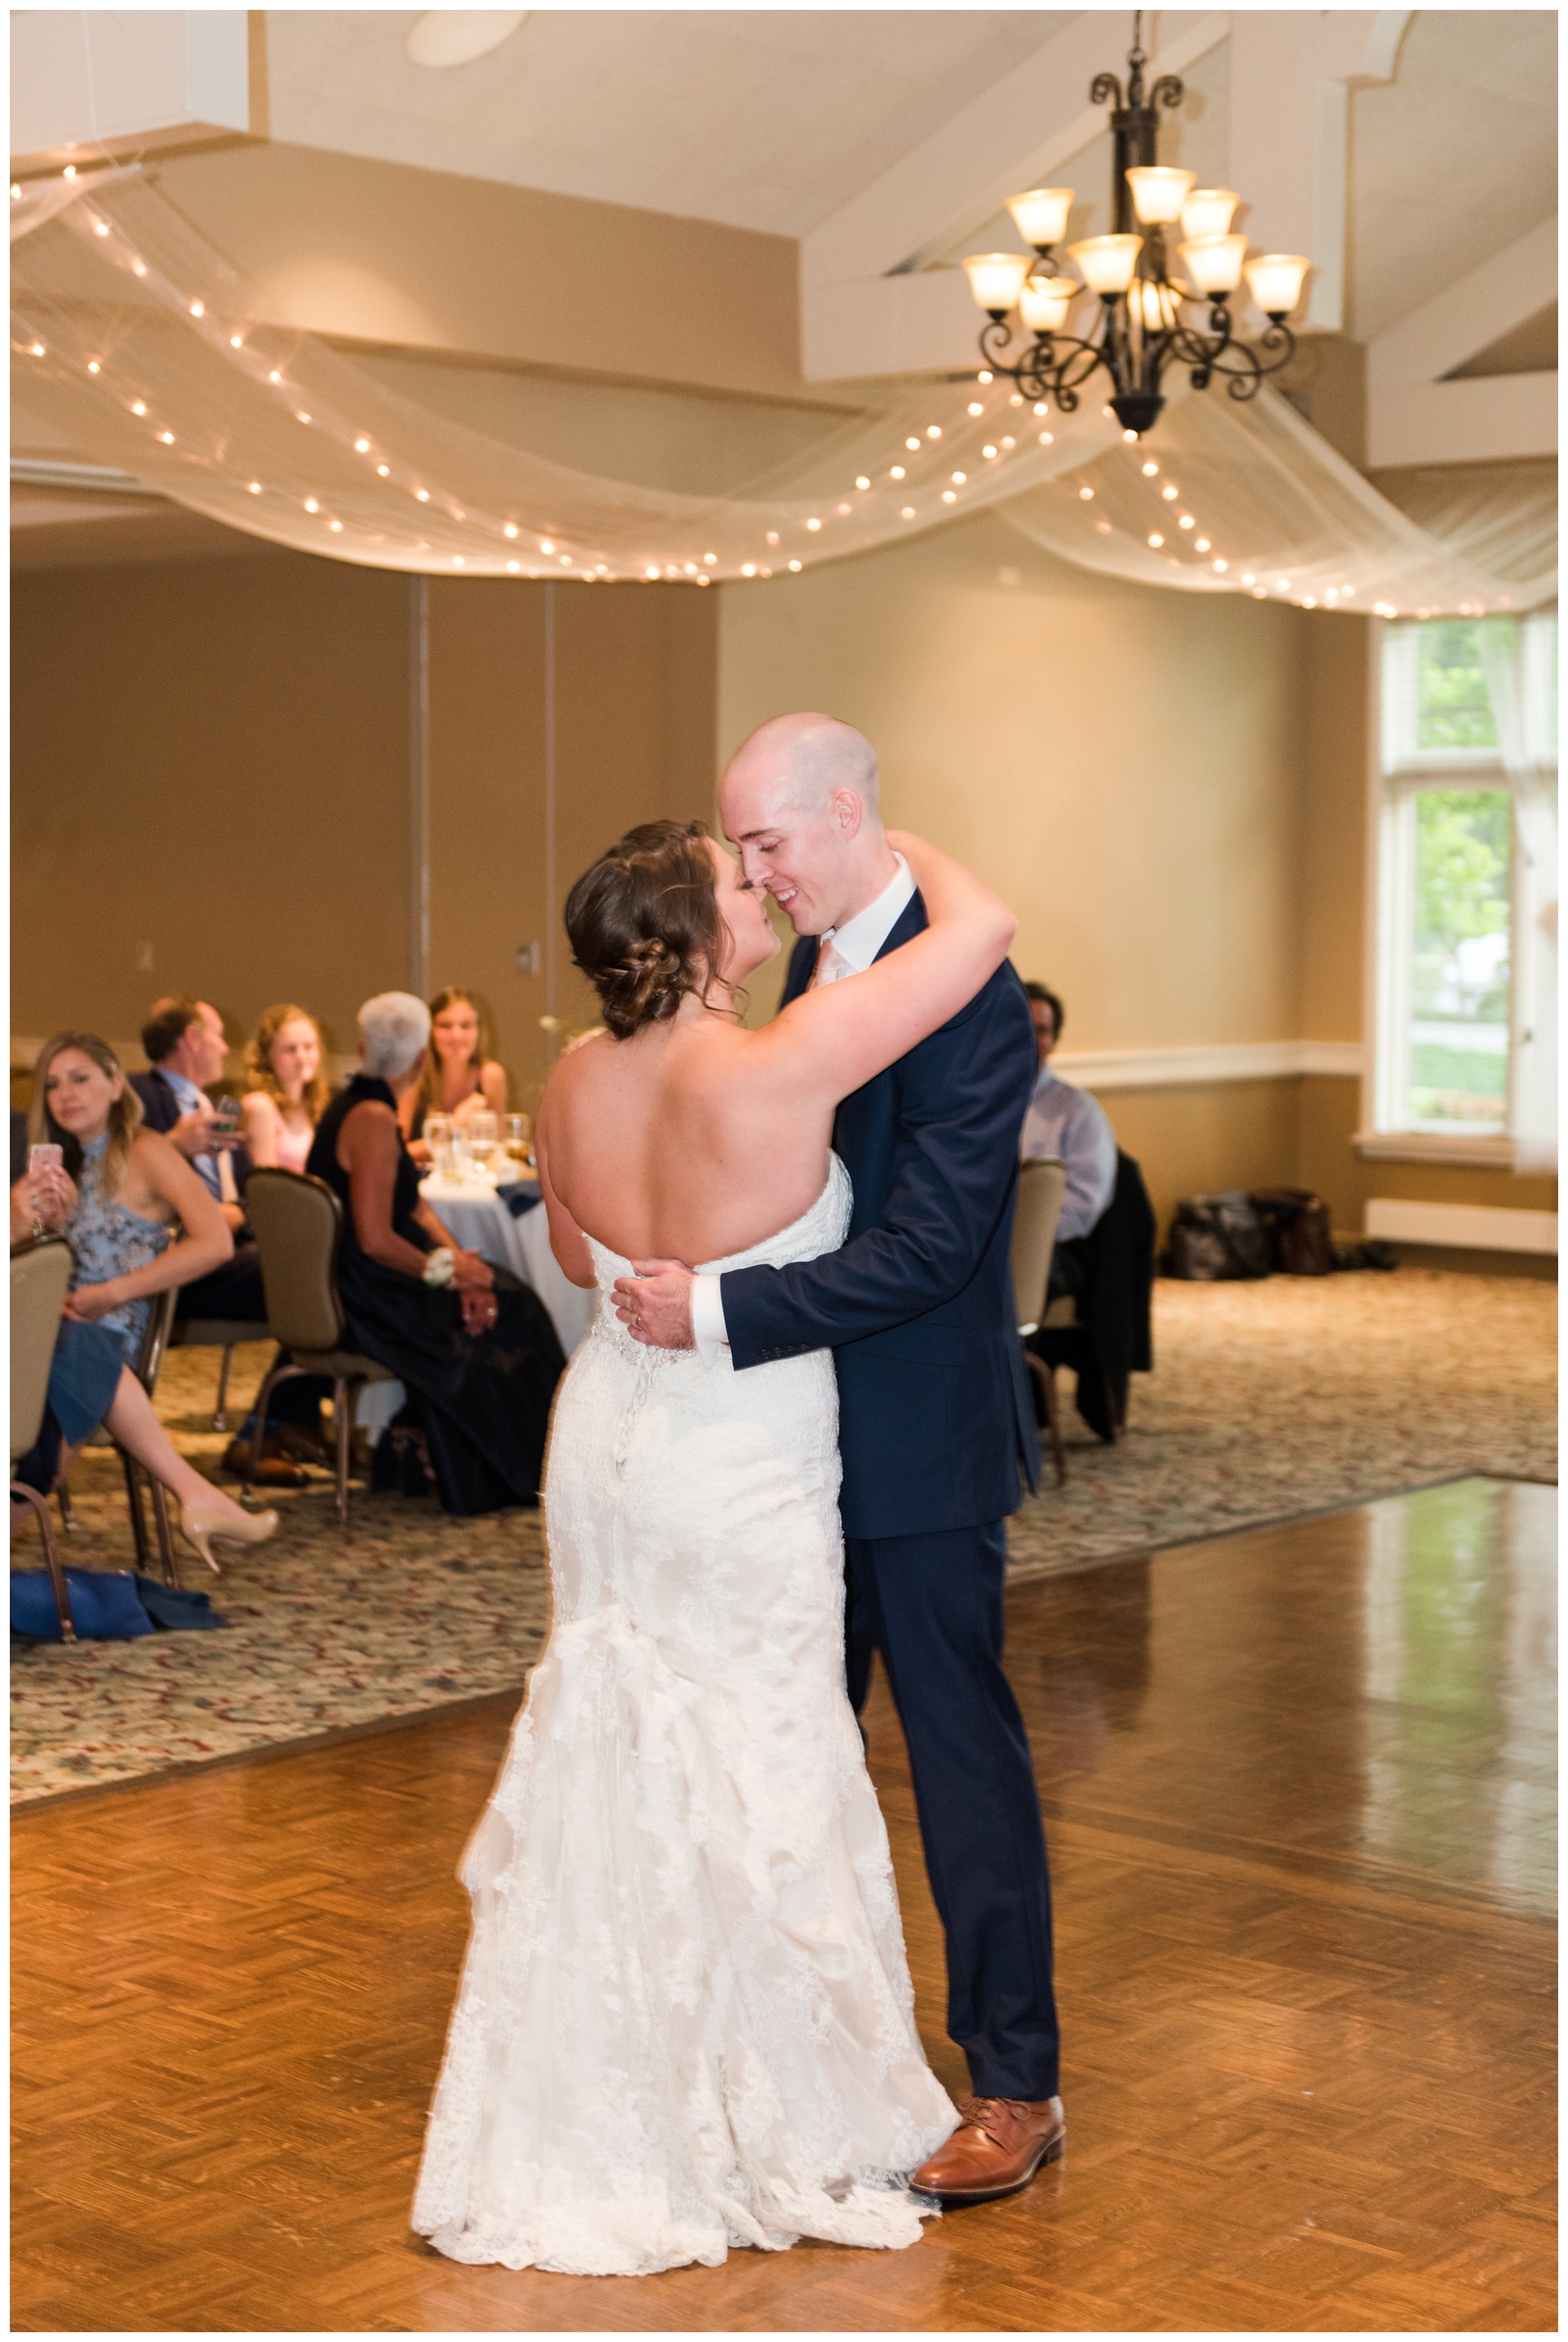 groom nuzzles nose with bride during first dance at wedding reception in Ohio